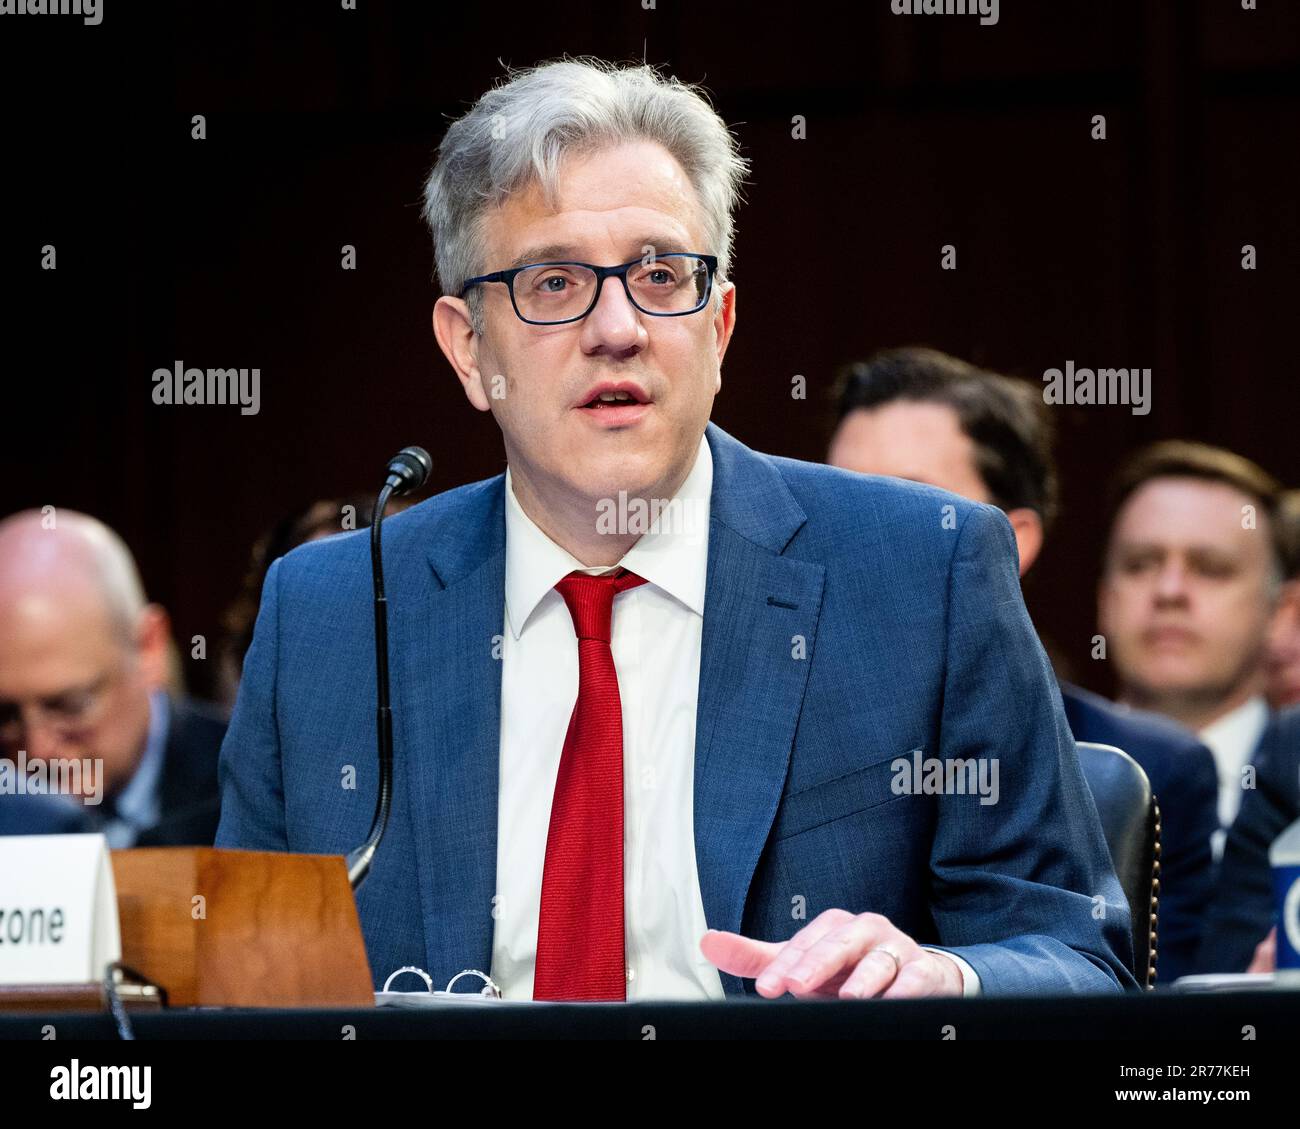 Washington, United States. 13th June, 2023. Chris Fonzone, General Counsel, Office of the Director of National Intelligence, speaking at a hearing of the Senate Judiciary Committee at the U.S. Capitol. (Photo by Michael Brochstein/Sipa USA) Credit: Sipa USA/Alamy Live News Stock Photo